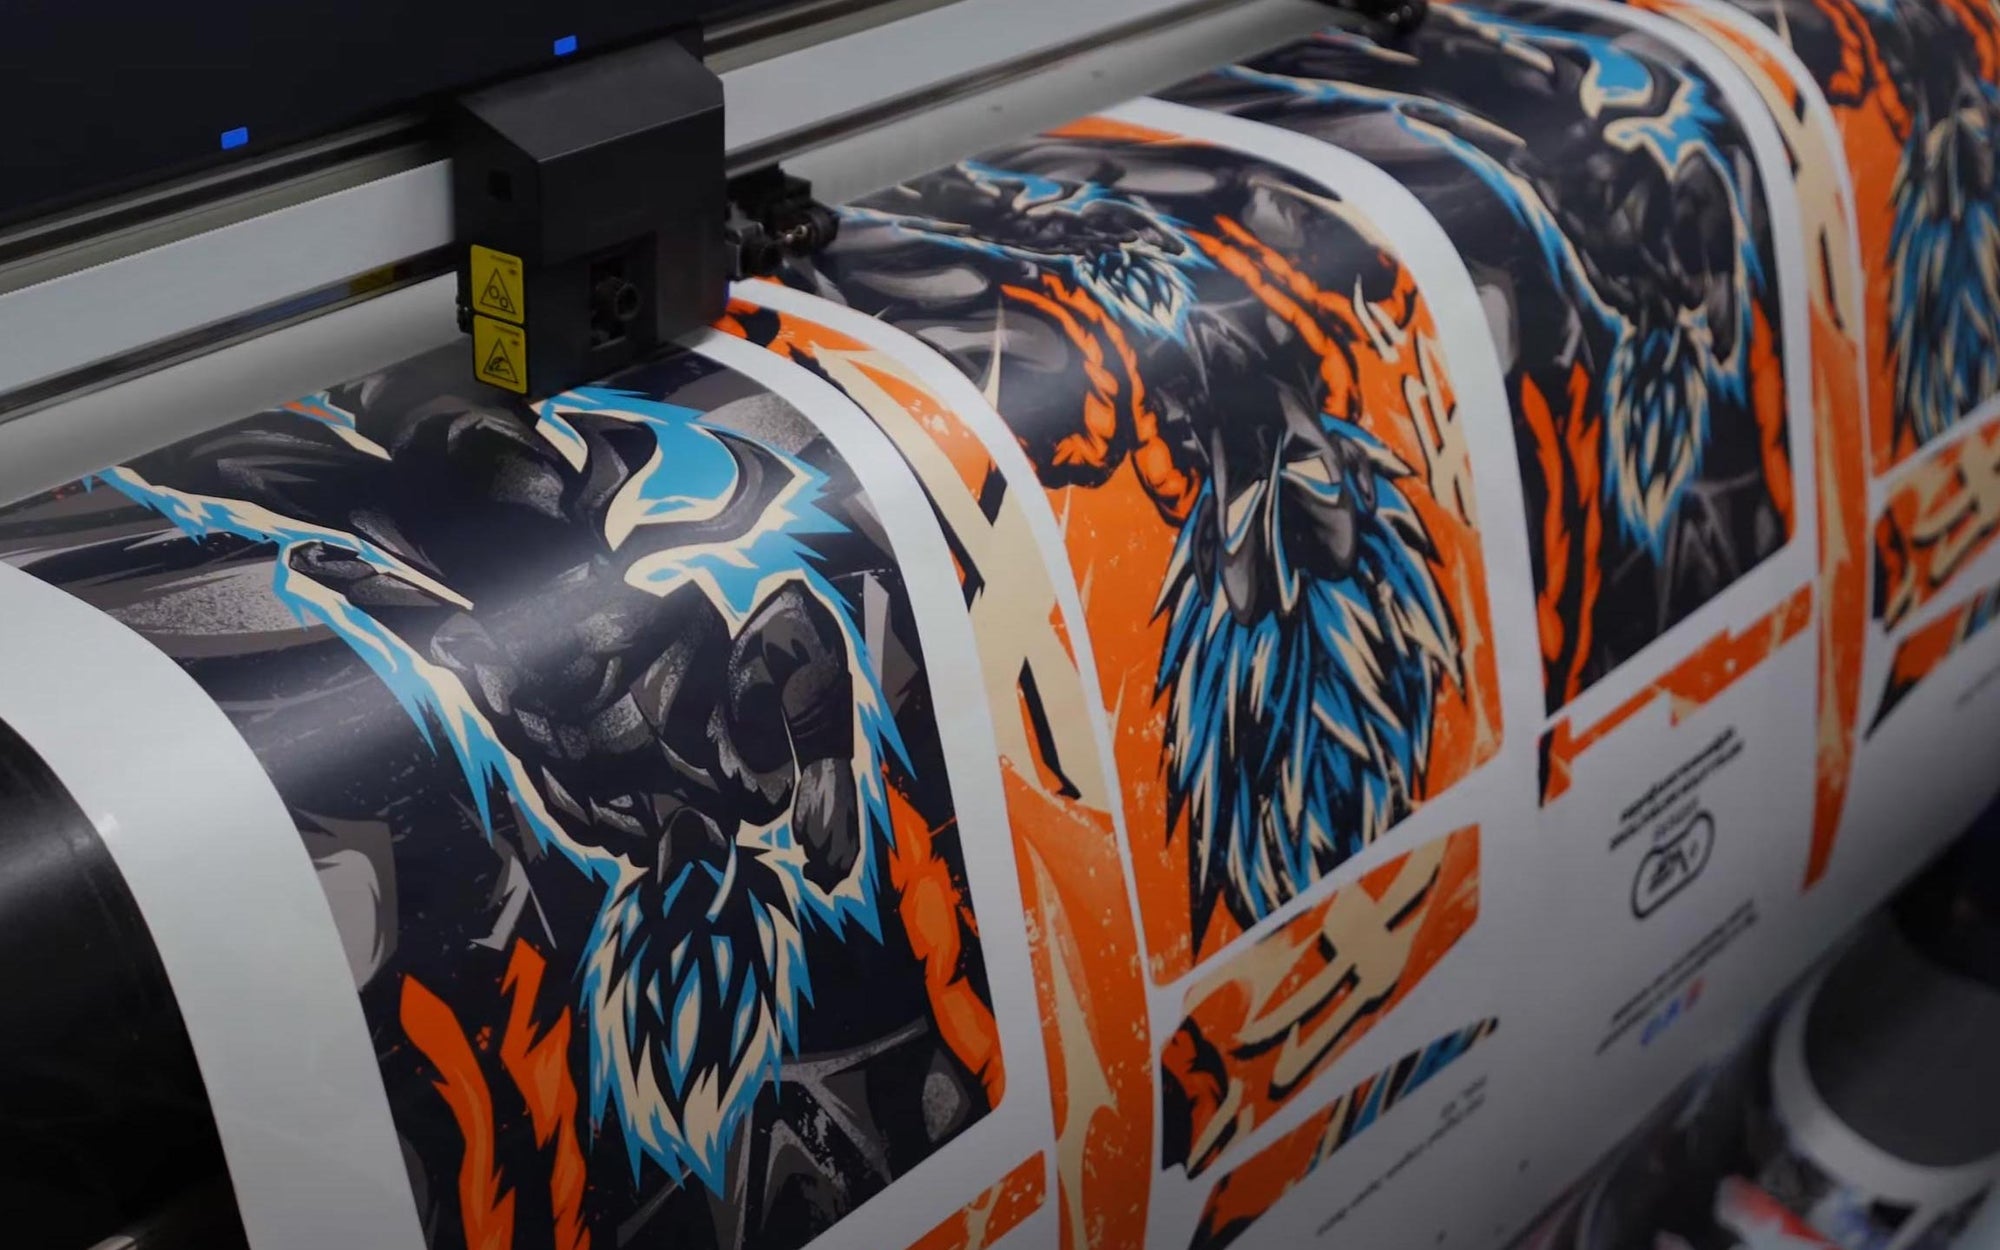 How it's made: Original art skins for PS5, Xbox Series X and more